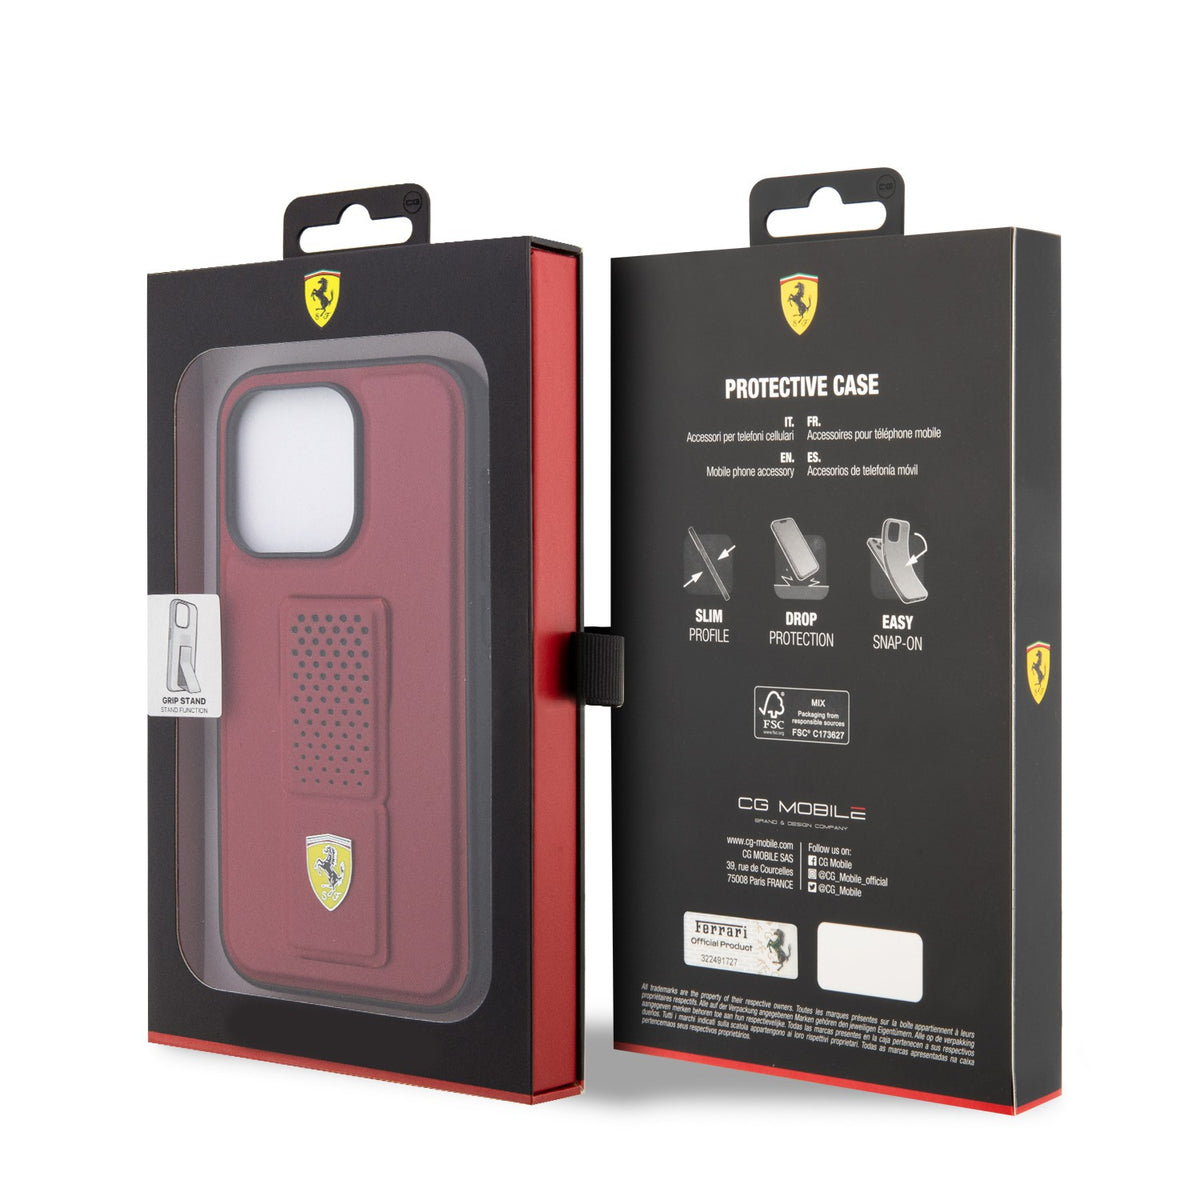 Ferrari Gripstand Case with More Variants